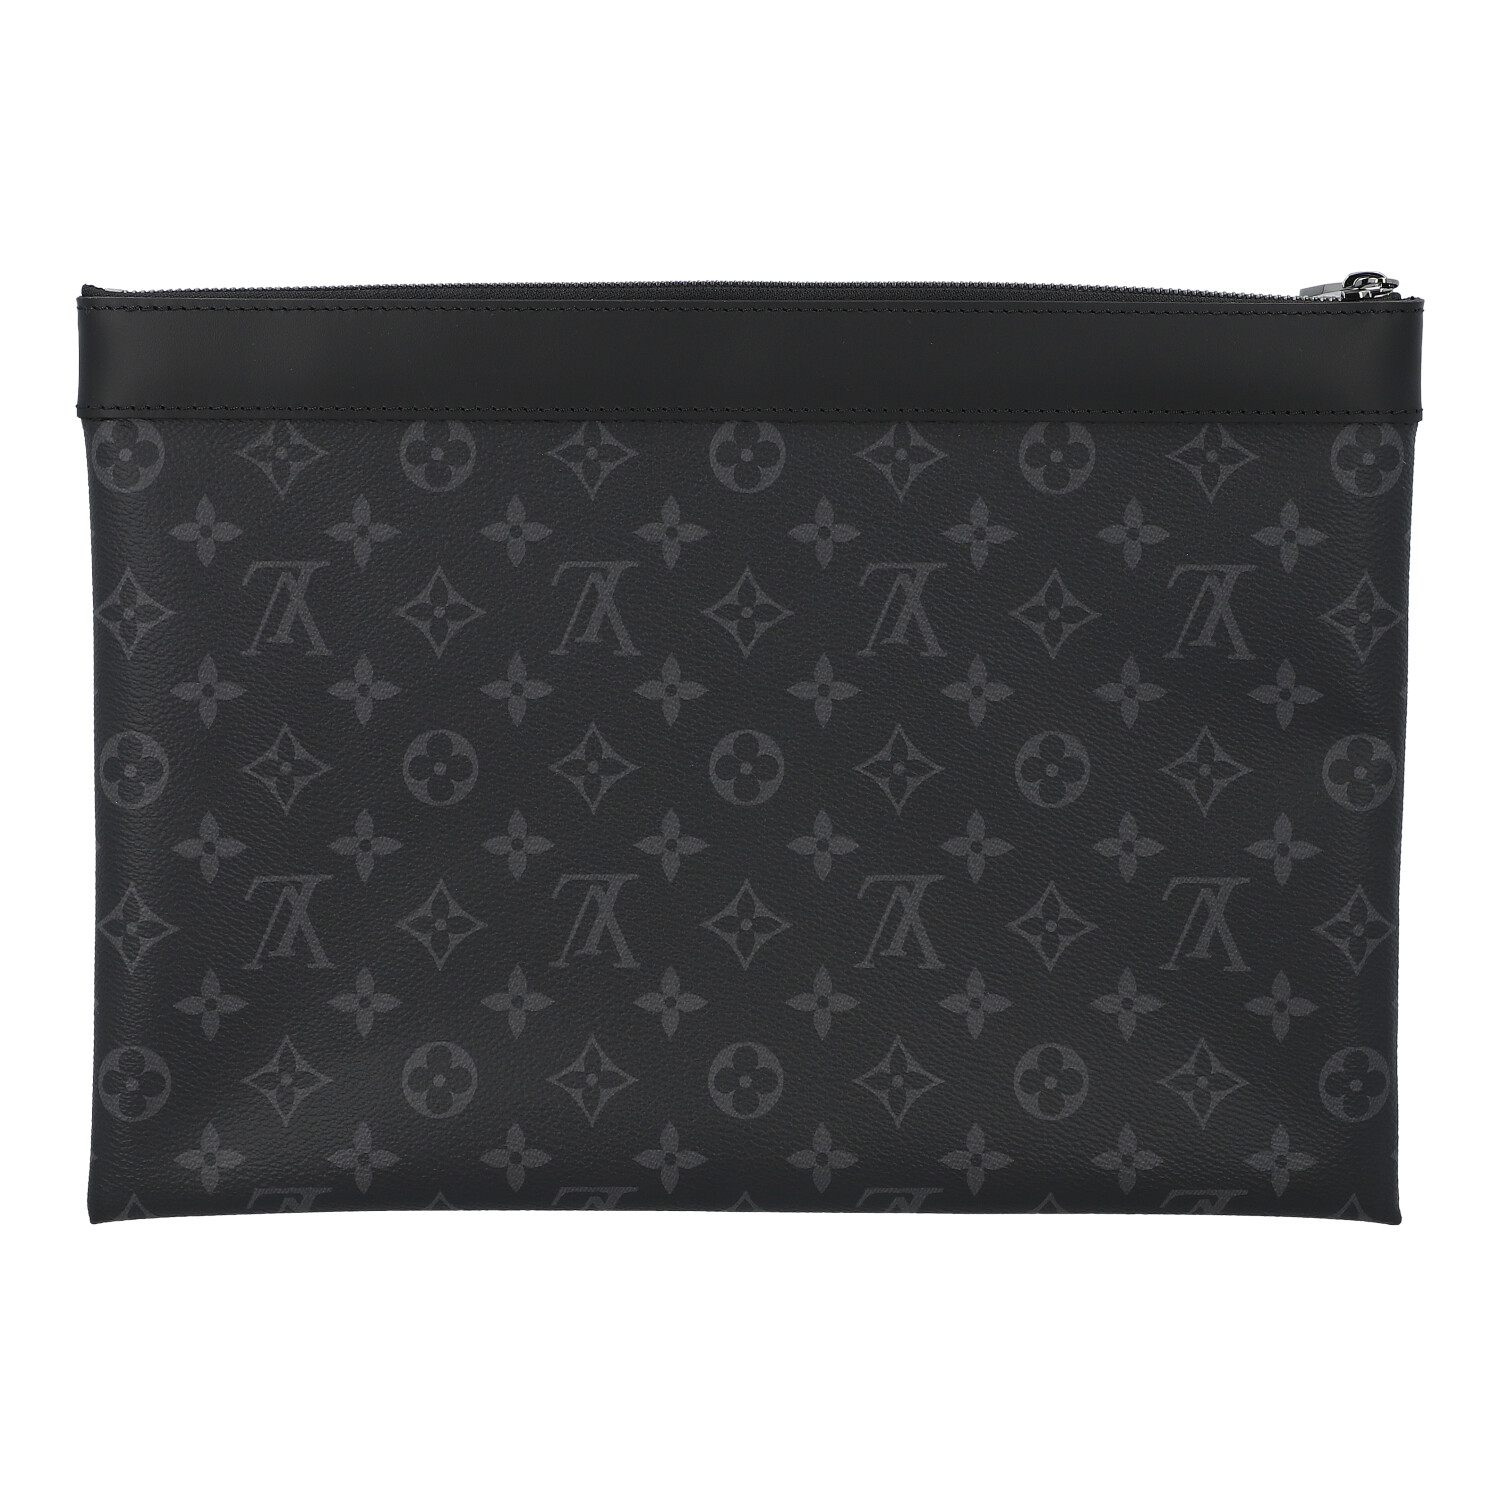 LOUIS VUITTON Pochette "DISCOVERY". - Image 4 of 6